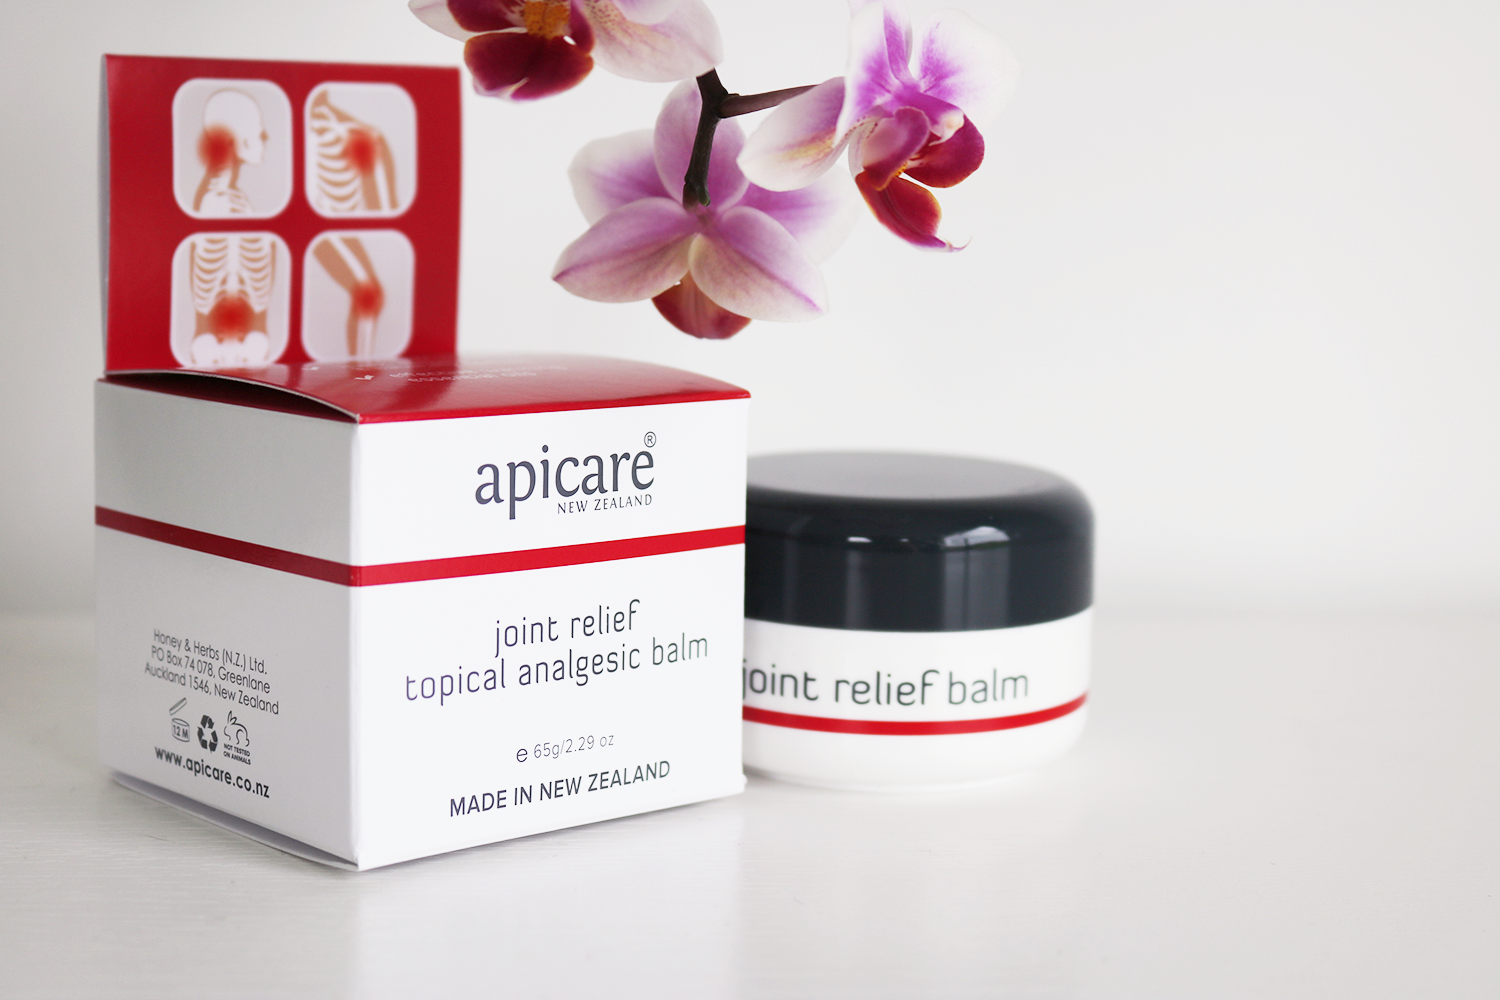 Apicare Joint Relief Topical Analgesic Balm Relief Packaging Design